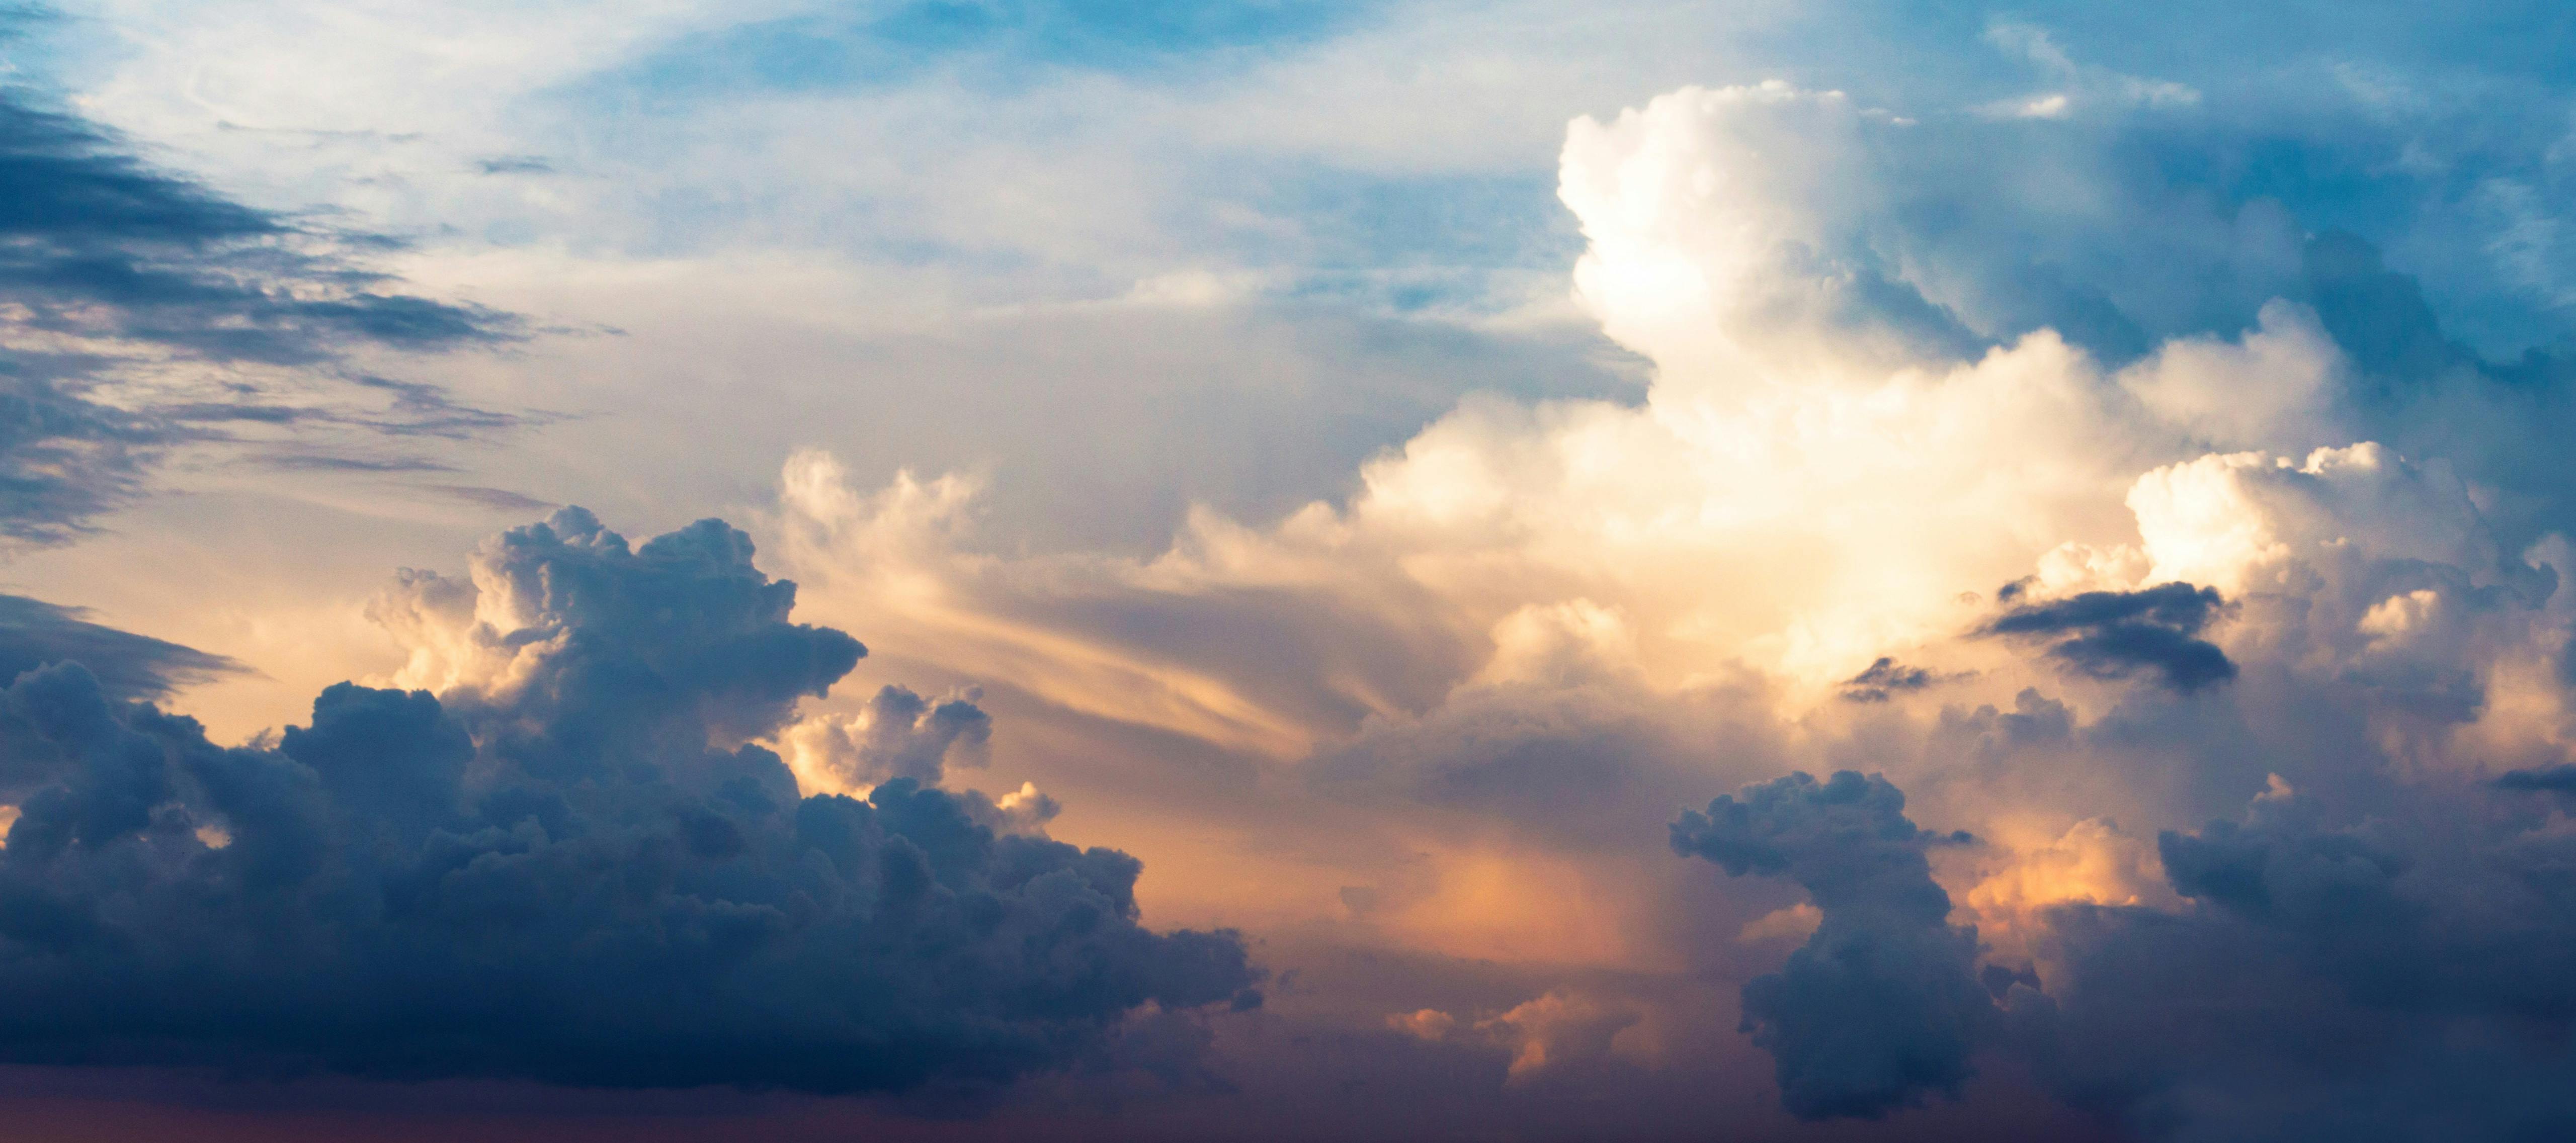 Download free photo of Clouds,cloudy sky,nature,sky,cloudy - from